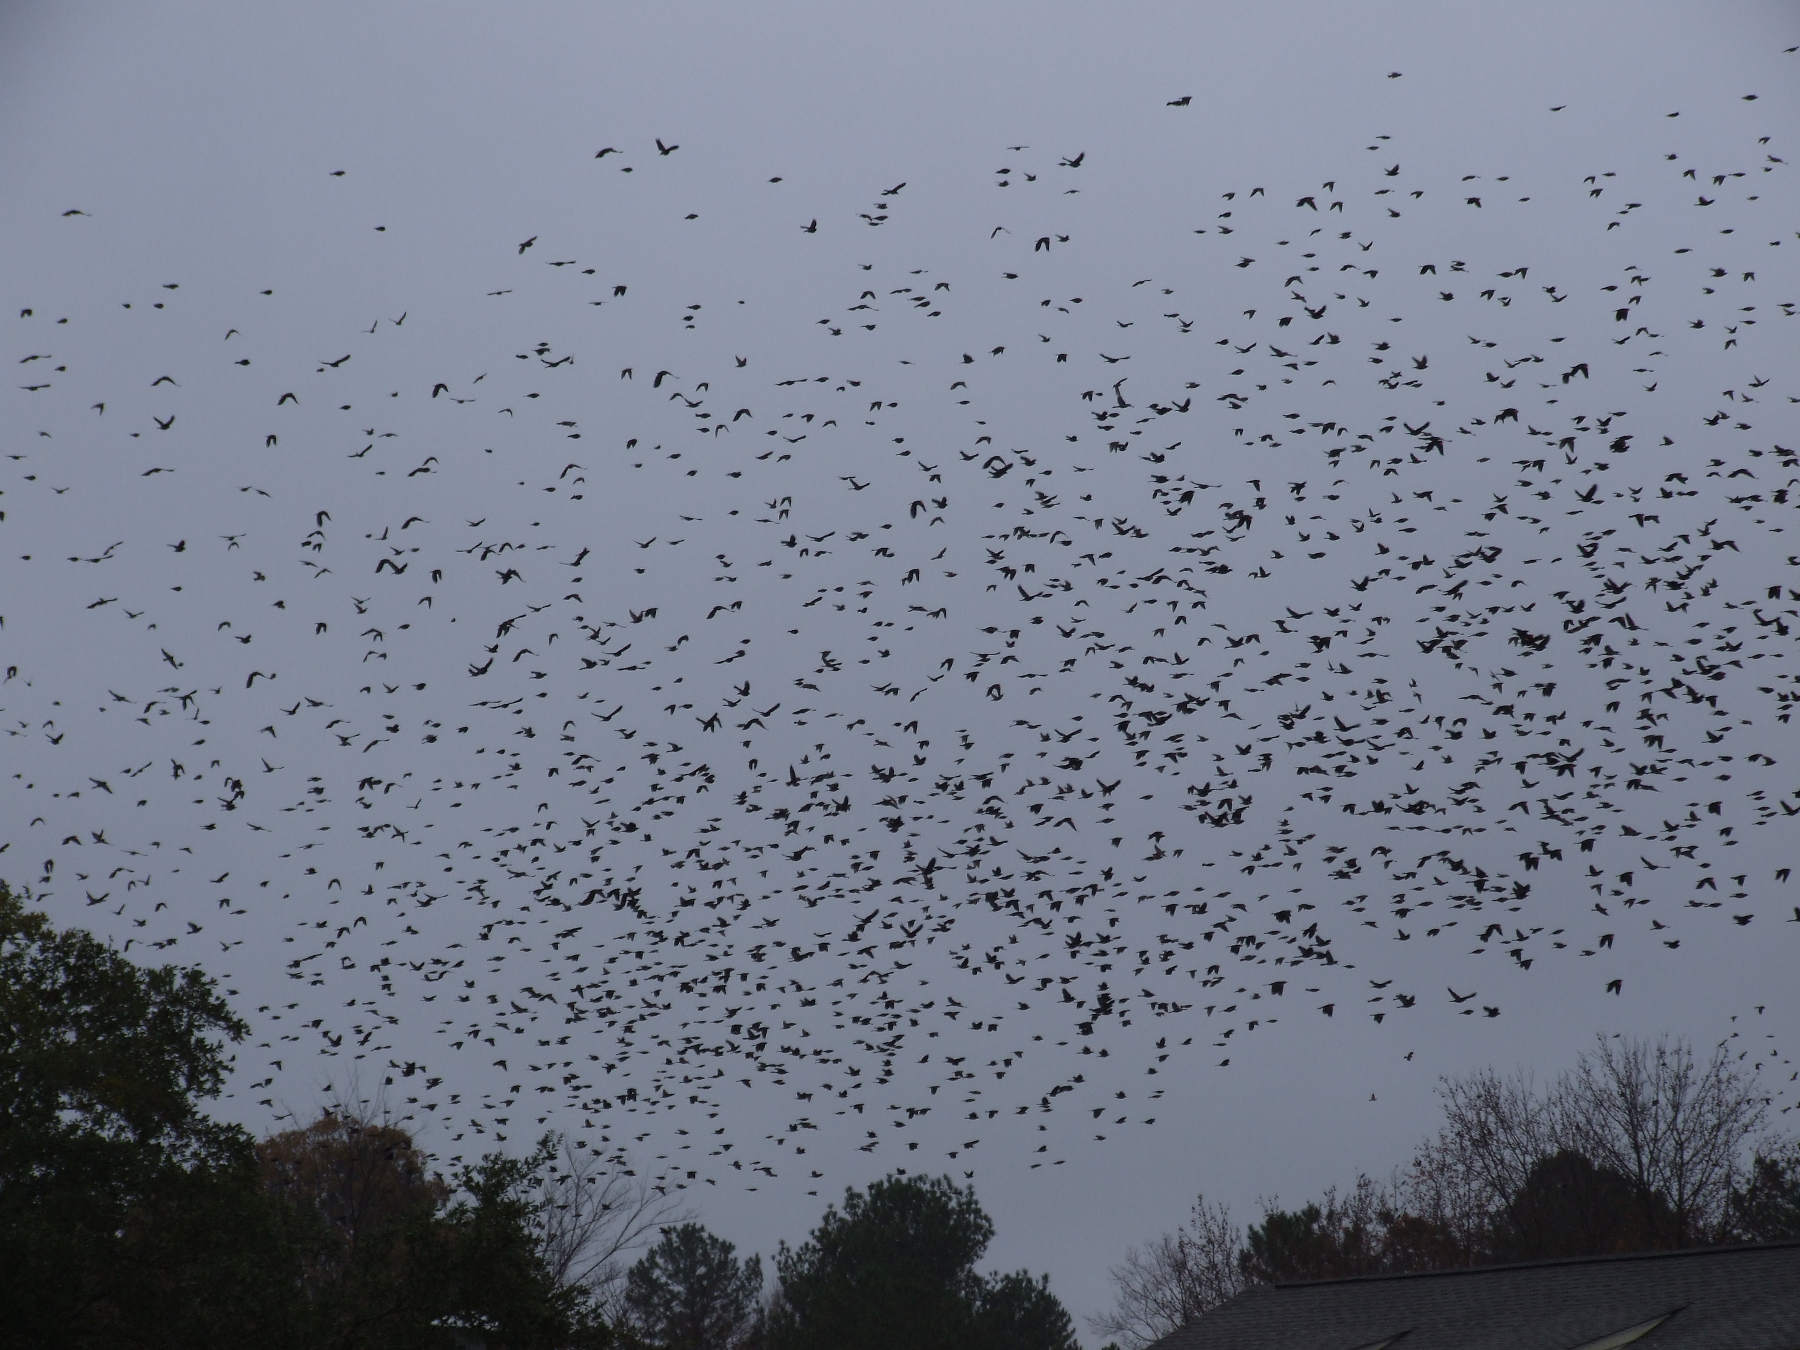 The endemic flock of starlings. Count them.